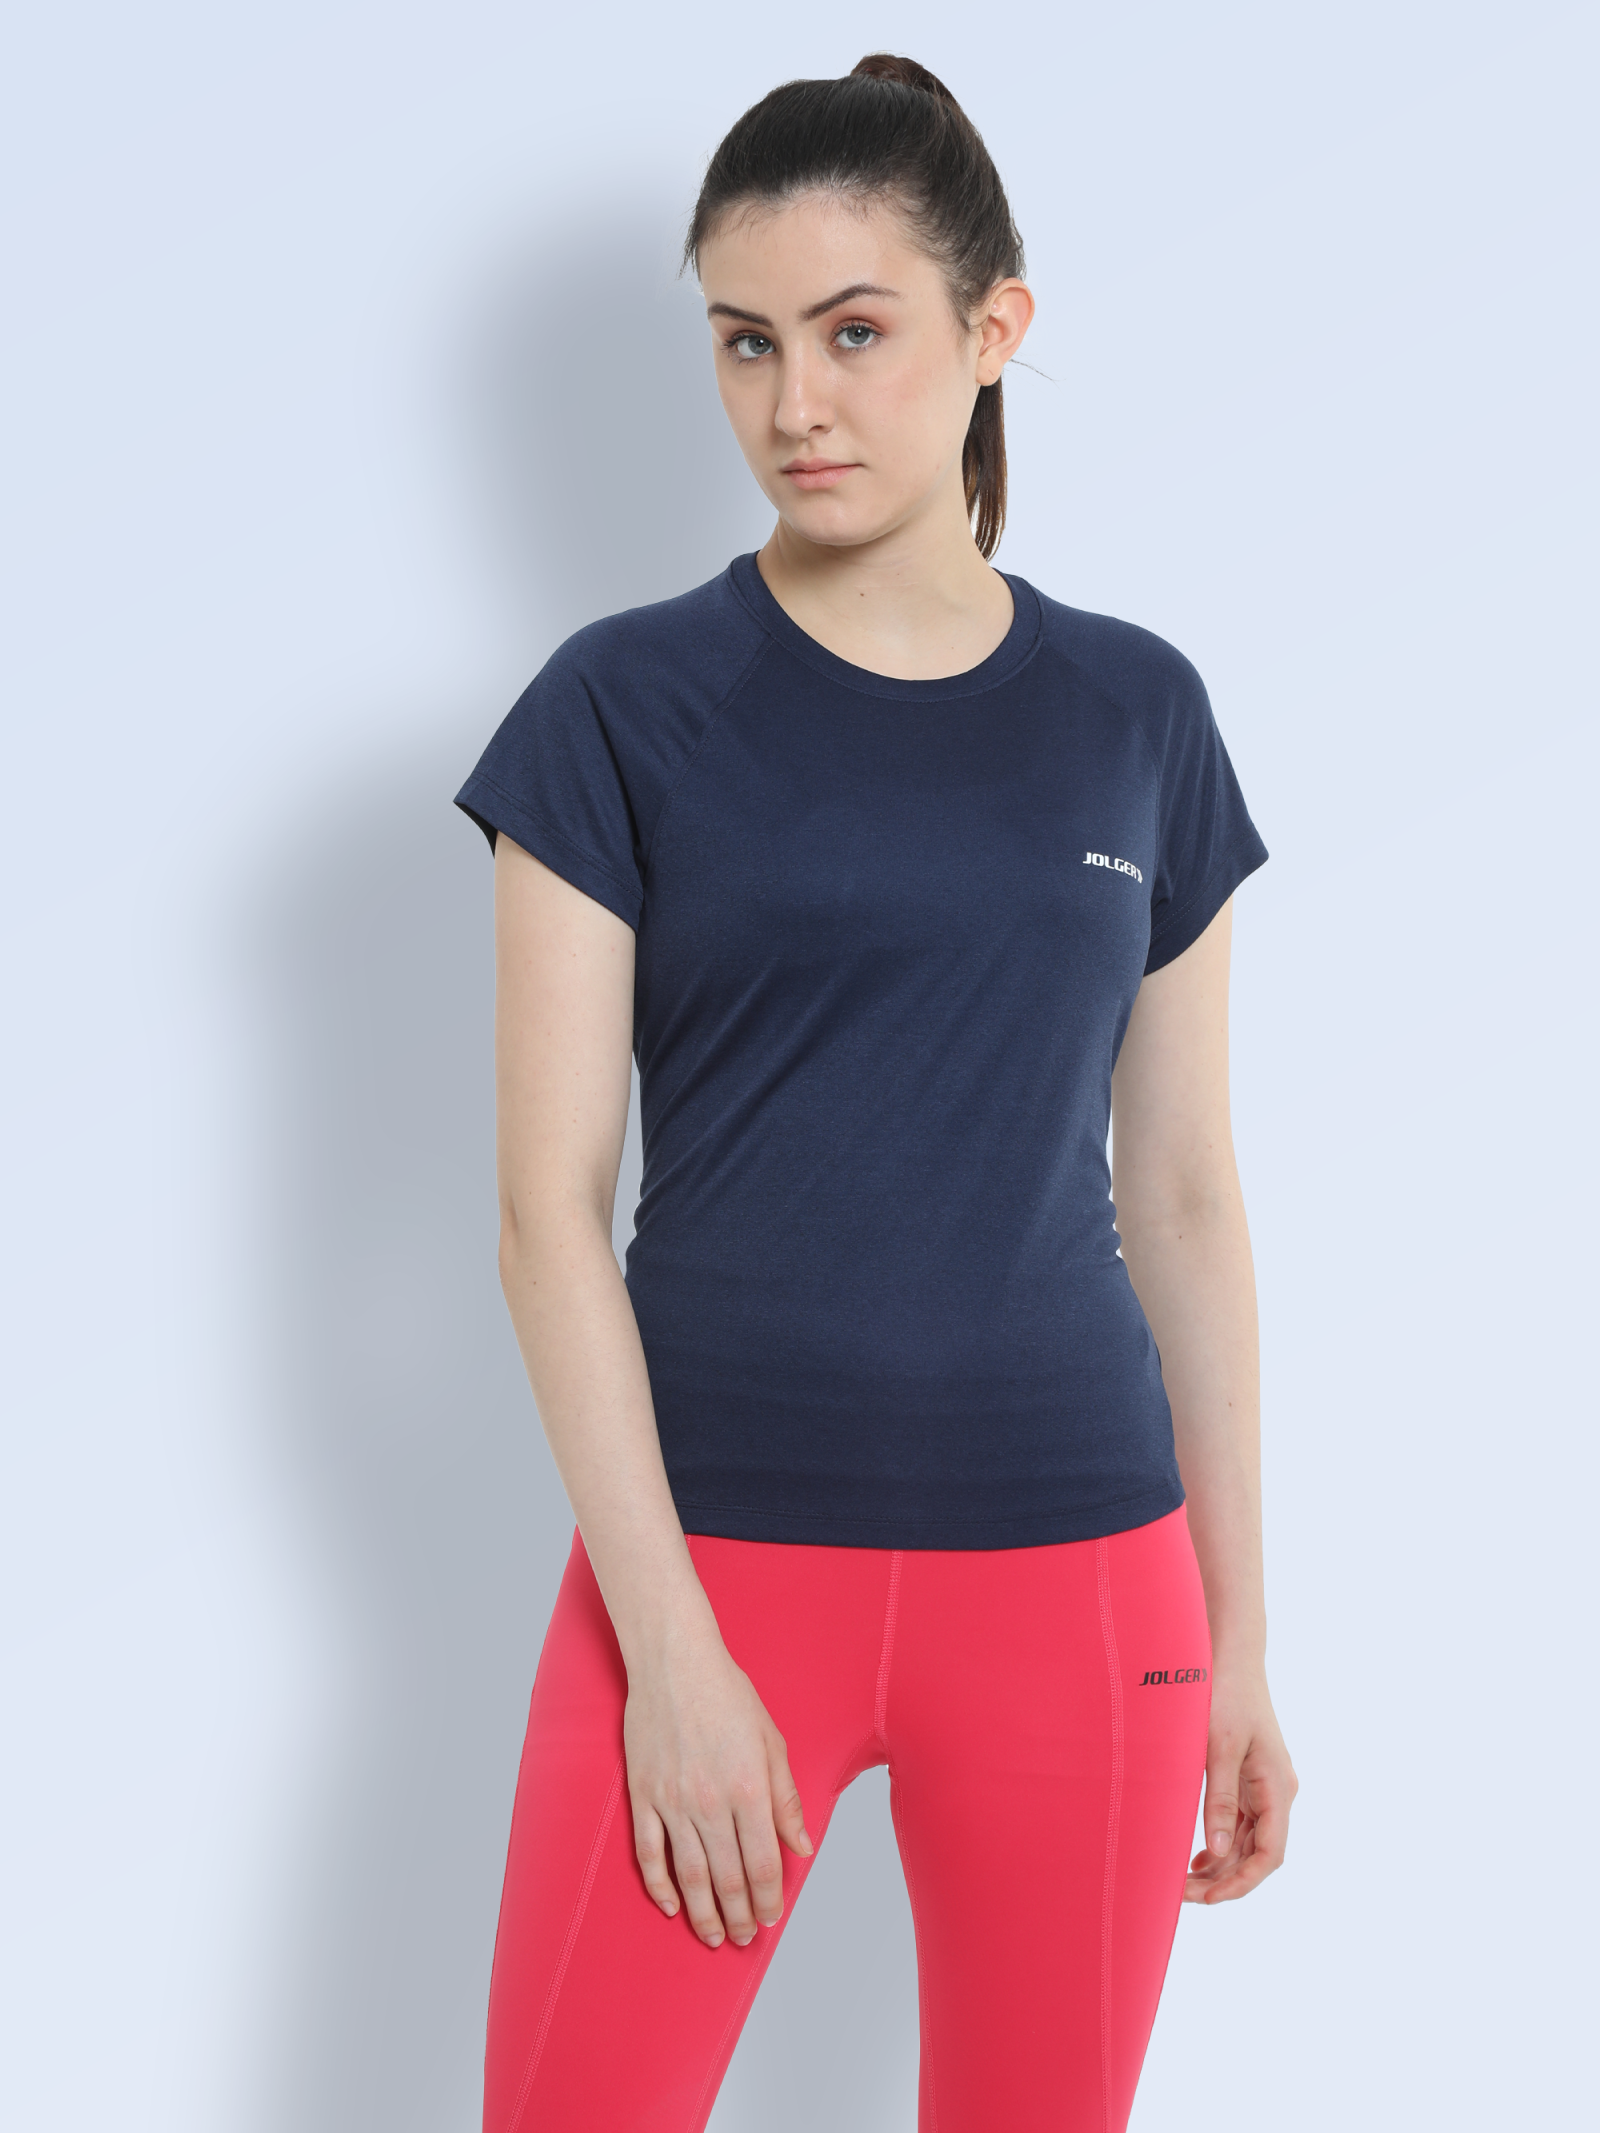 Women's Tees and Tops  Sports & Gym T-shirts For Women